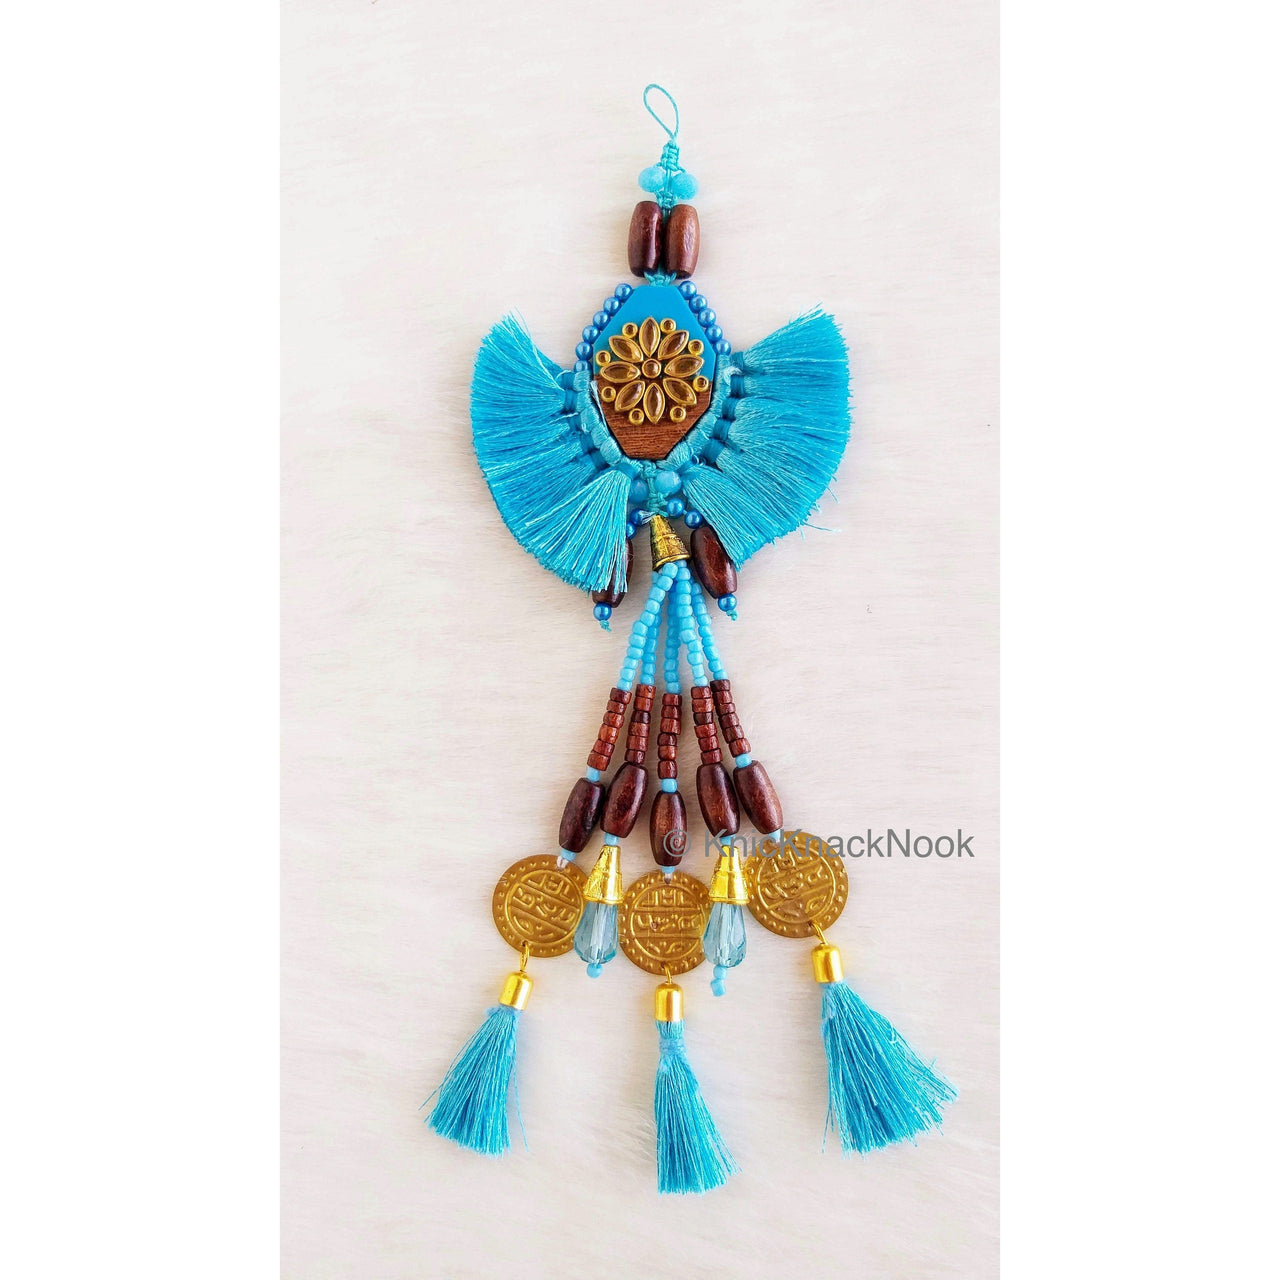 Cyan Blue Tassels With Blue Acrylic And Brown Wood Button In Kundan Stones, Wood Beads, Pearls